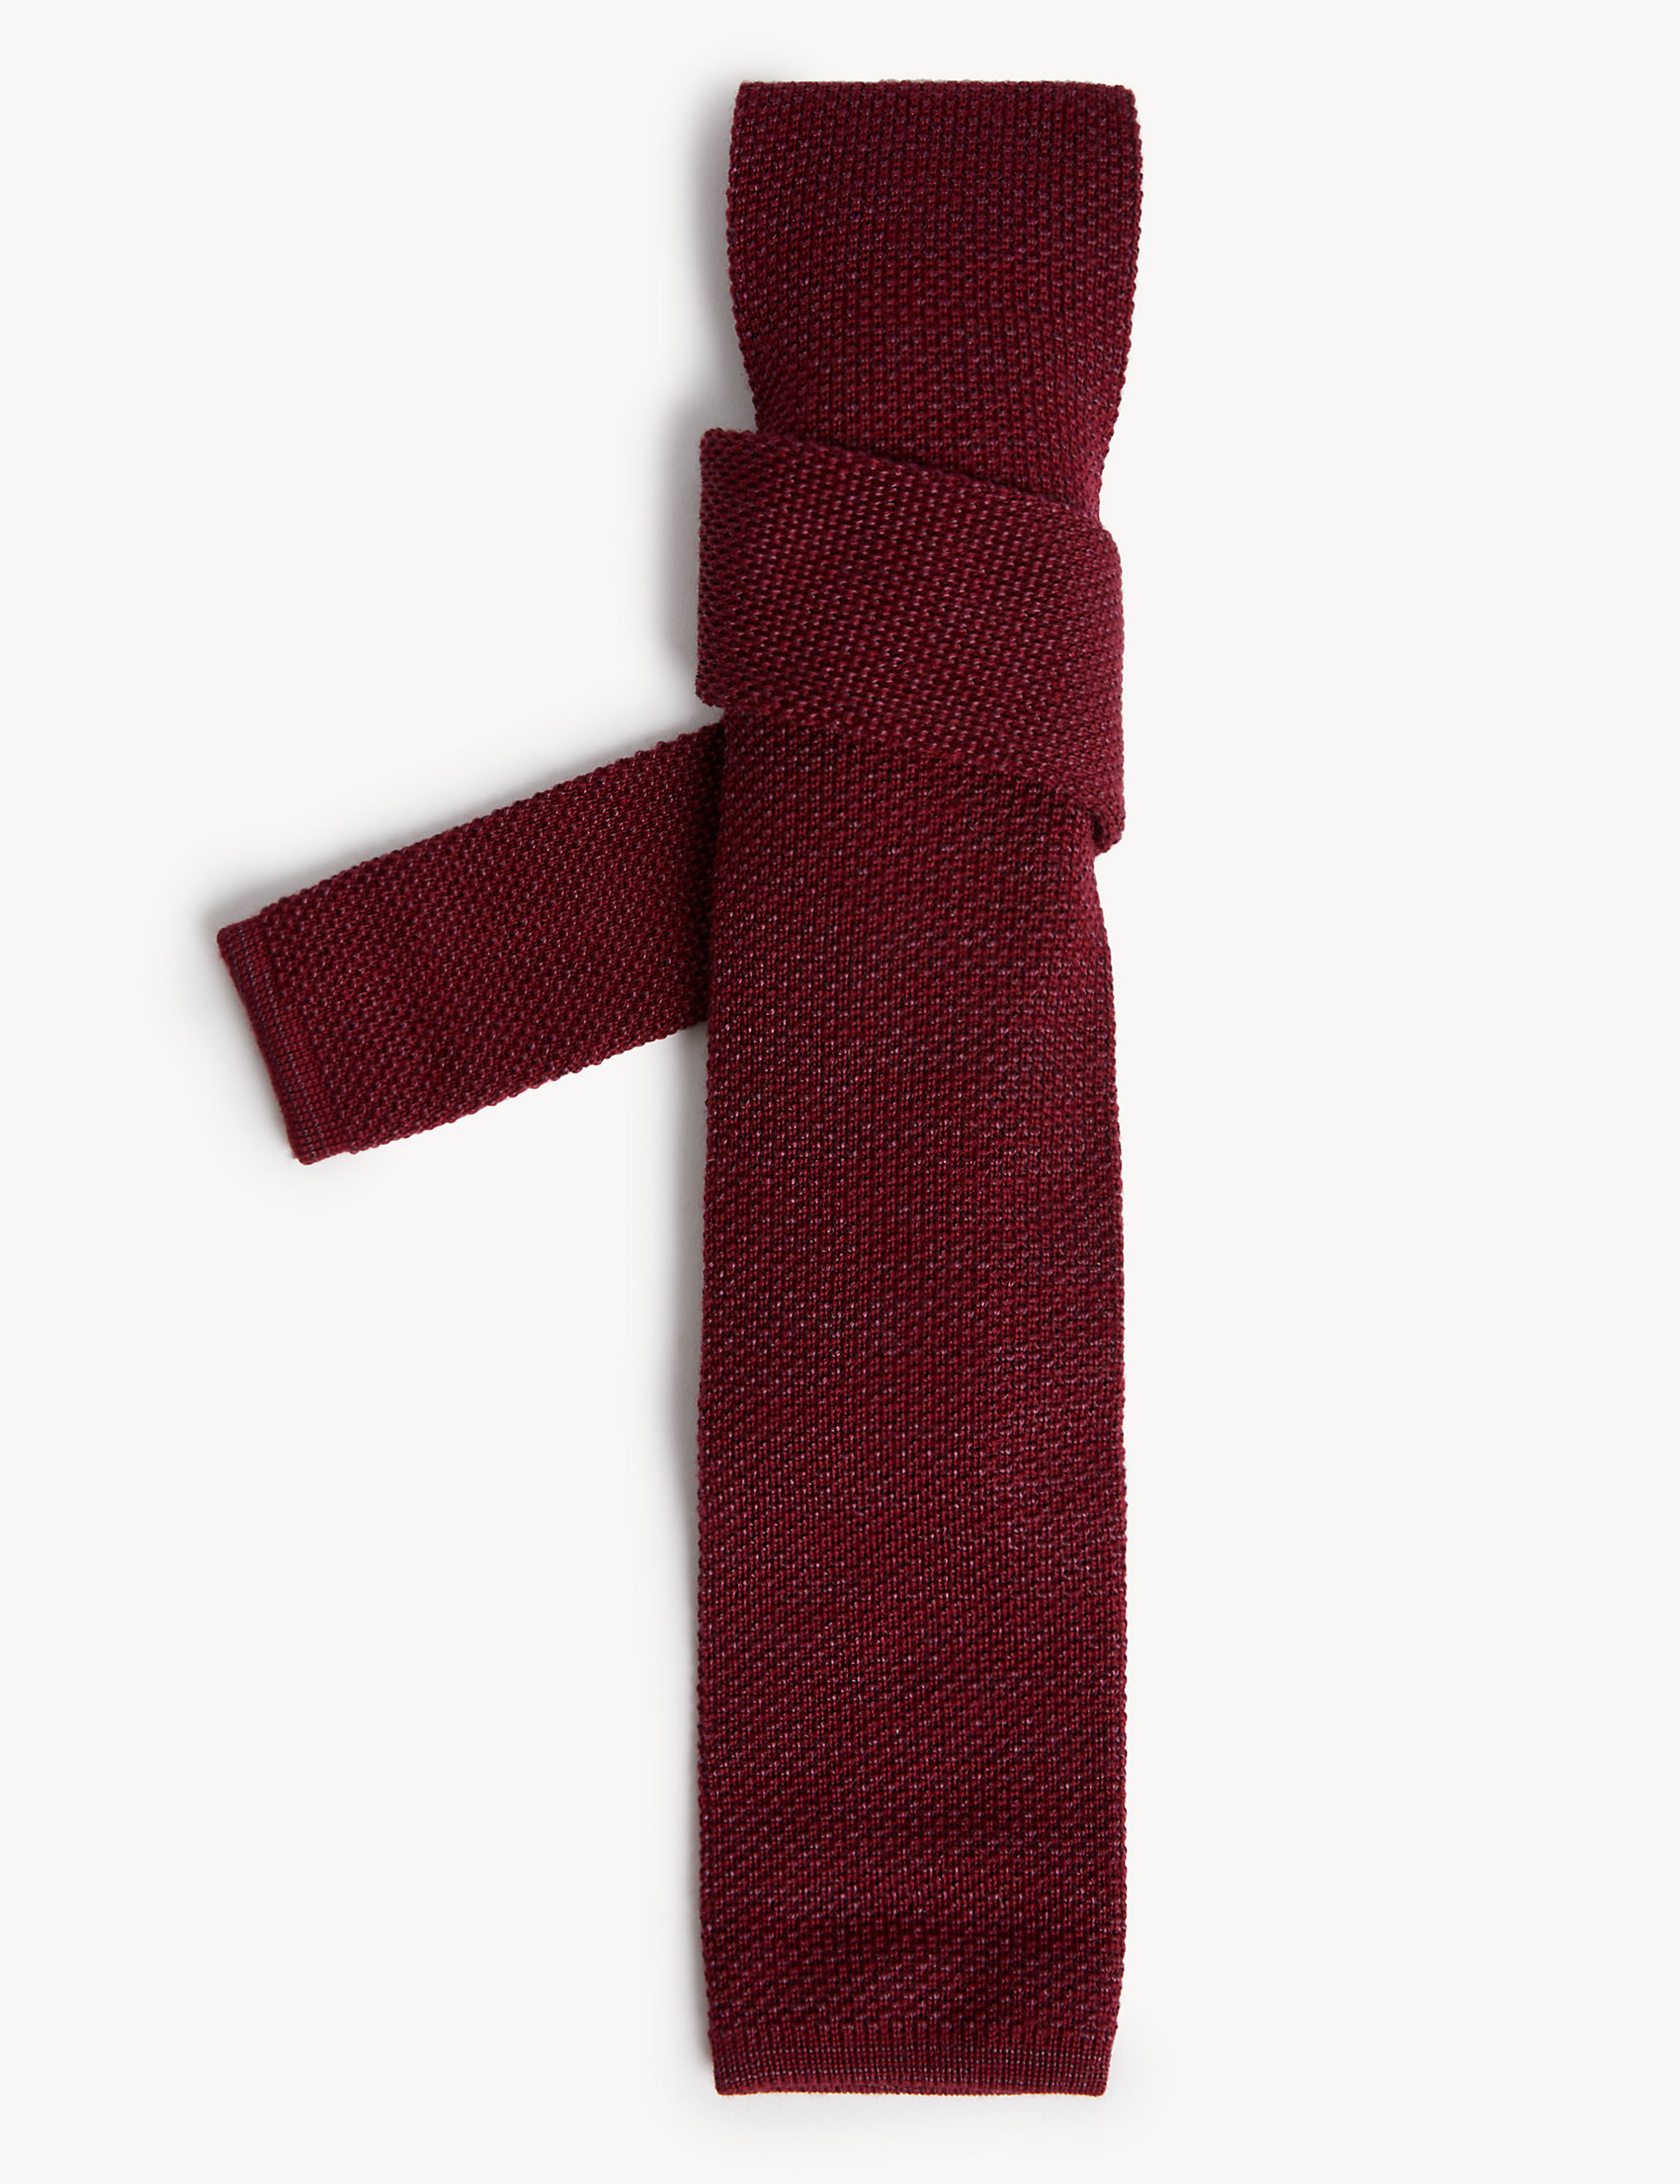 Italian Silk and Wool Knitted Tie